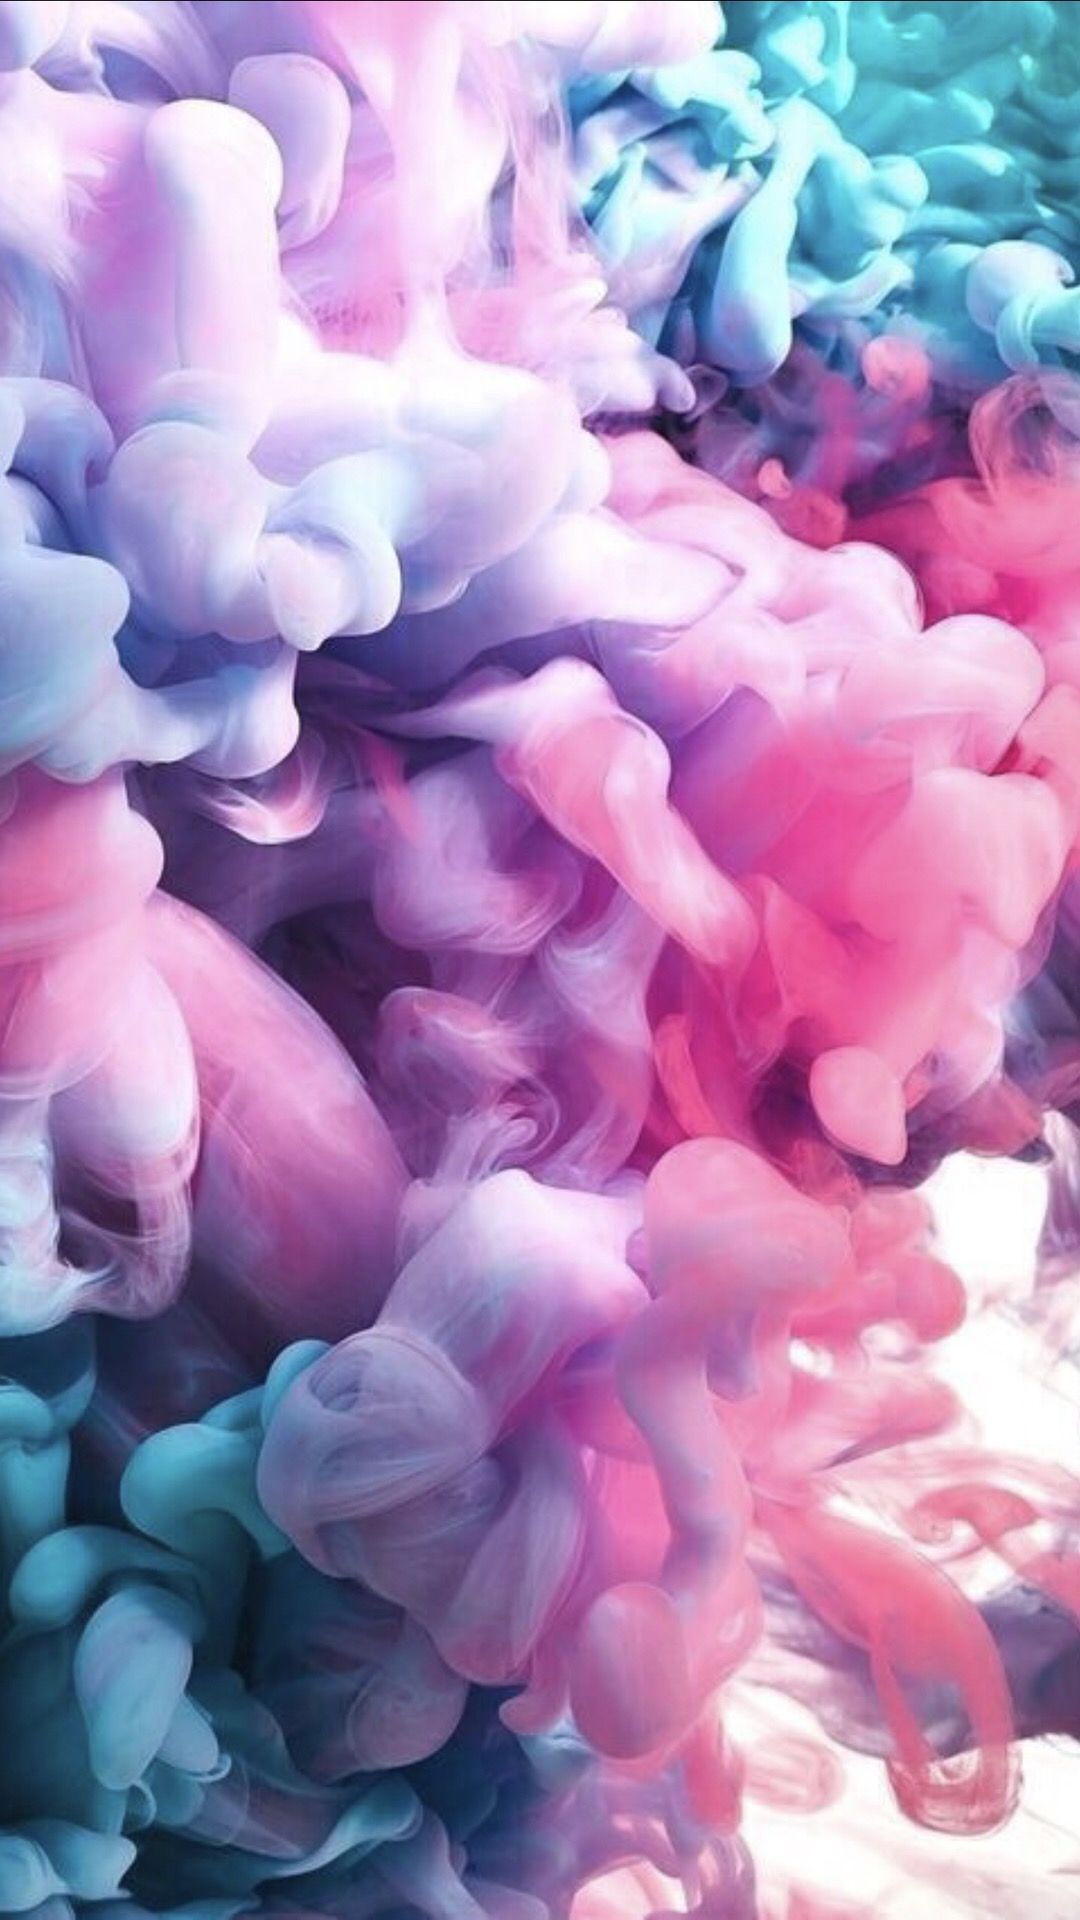 A close up of pink and blue ink - Smoke, candy